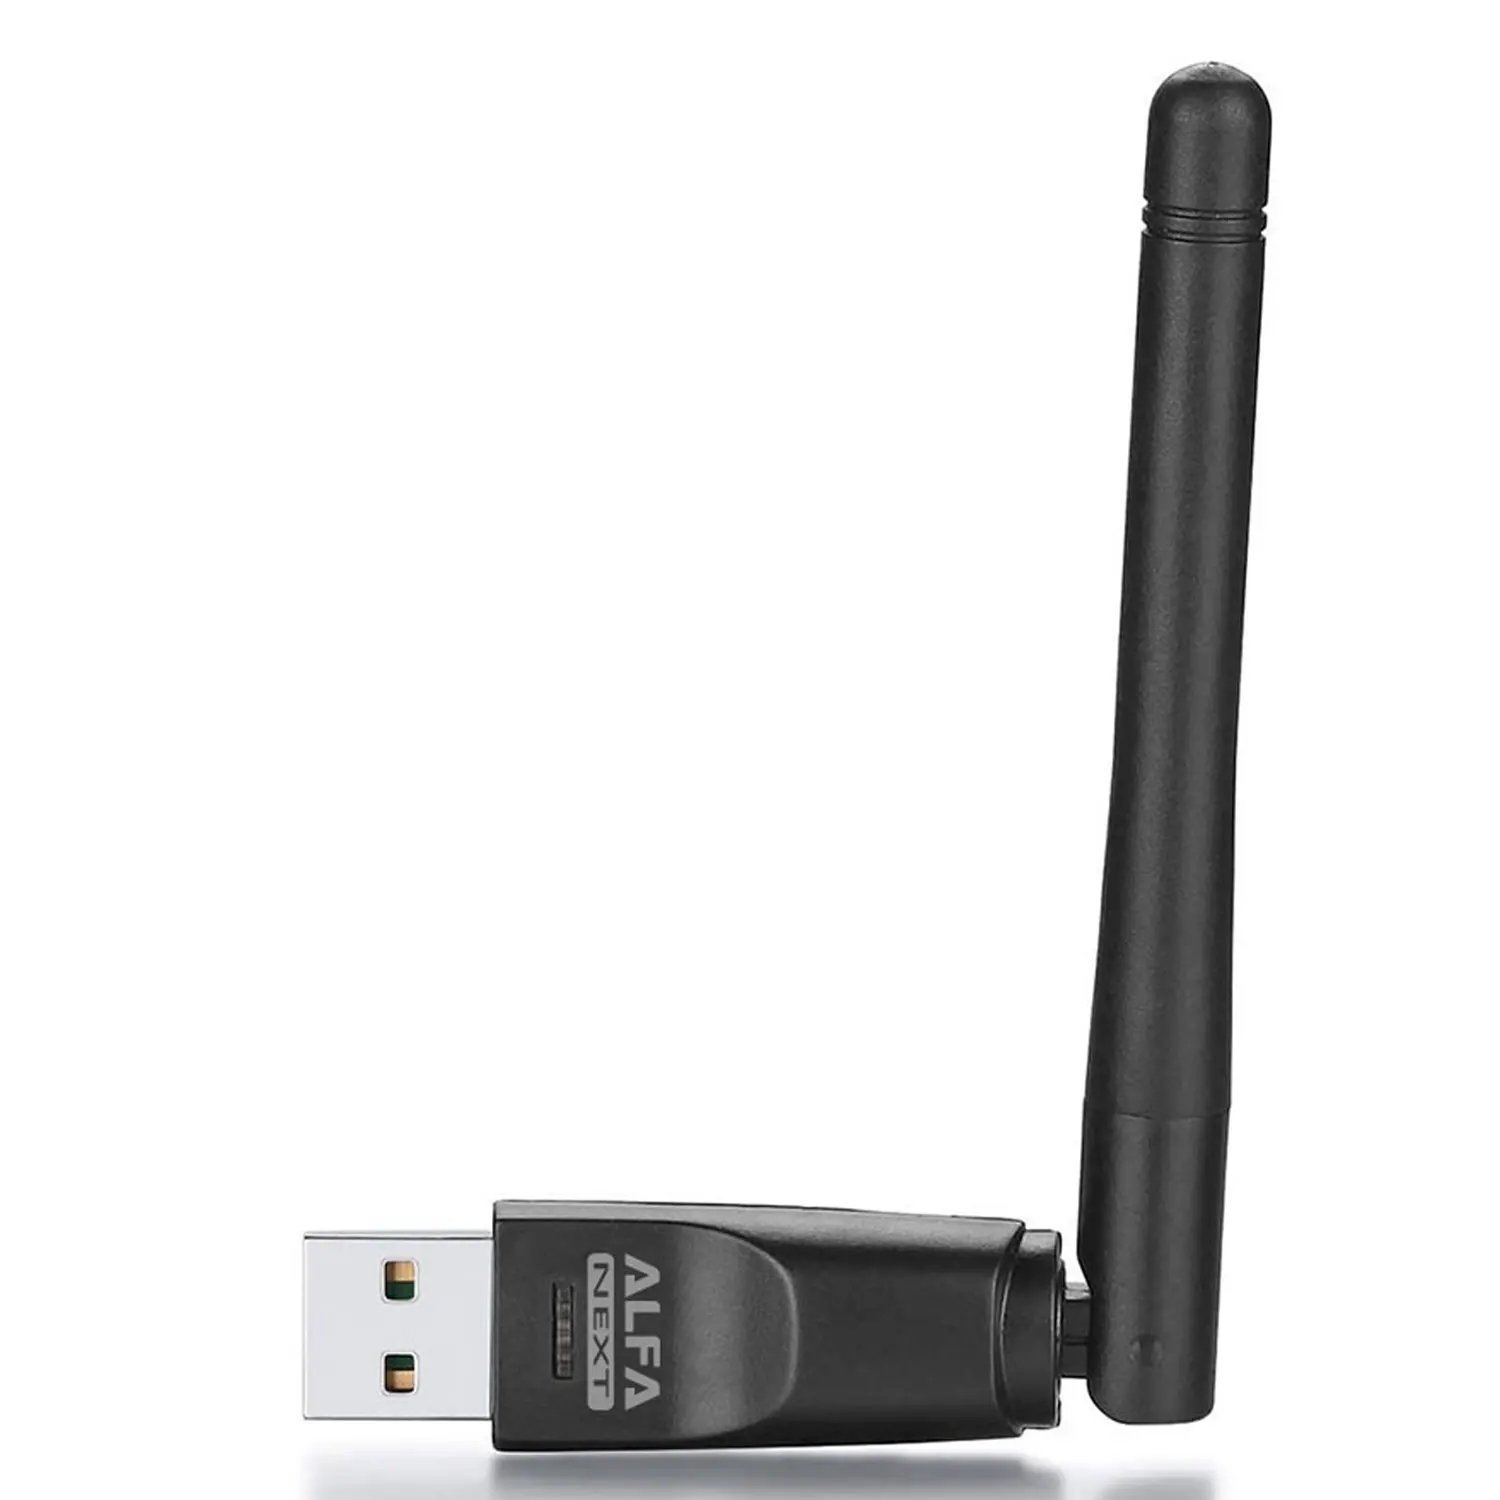 

Wifi Dongle High Quality Ax3000 6 Dual Band Pcie Adapter Usb Usb Adapter Usb Wireless Adapters With External Antennas